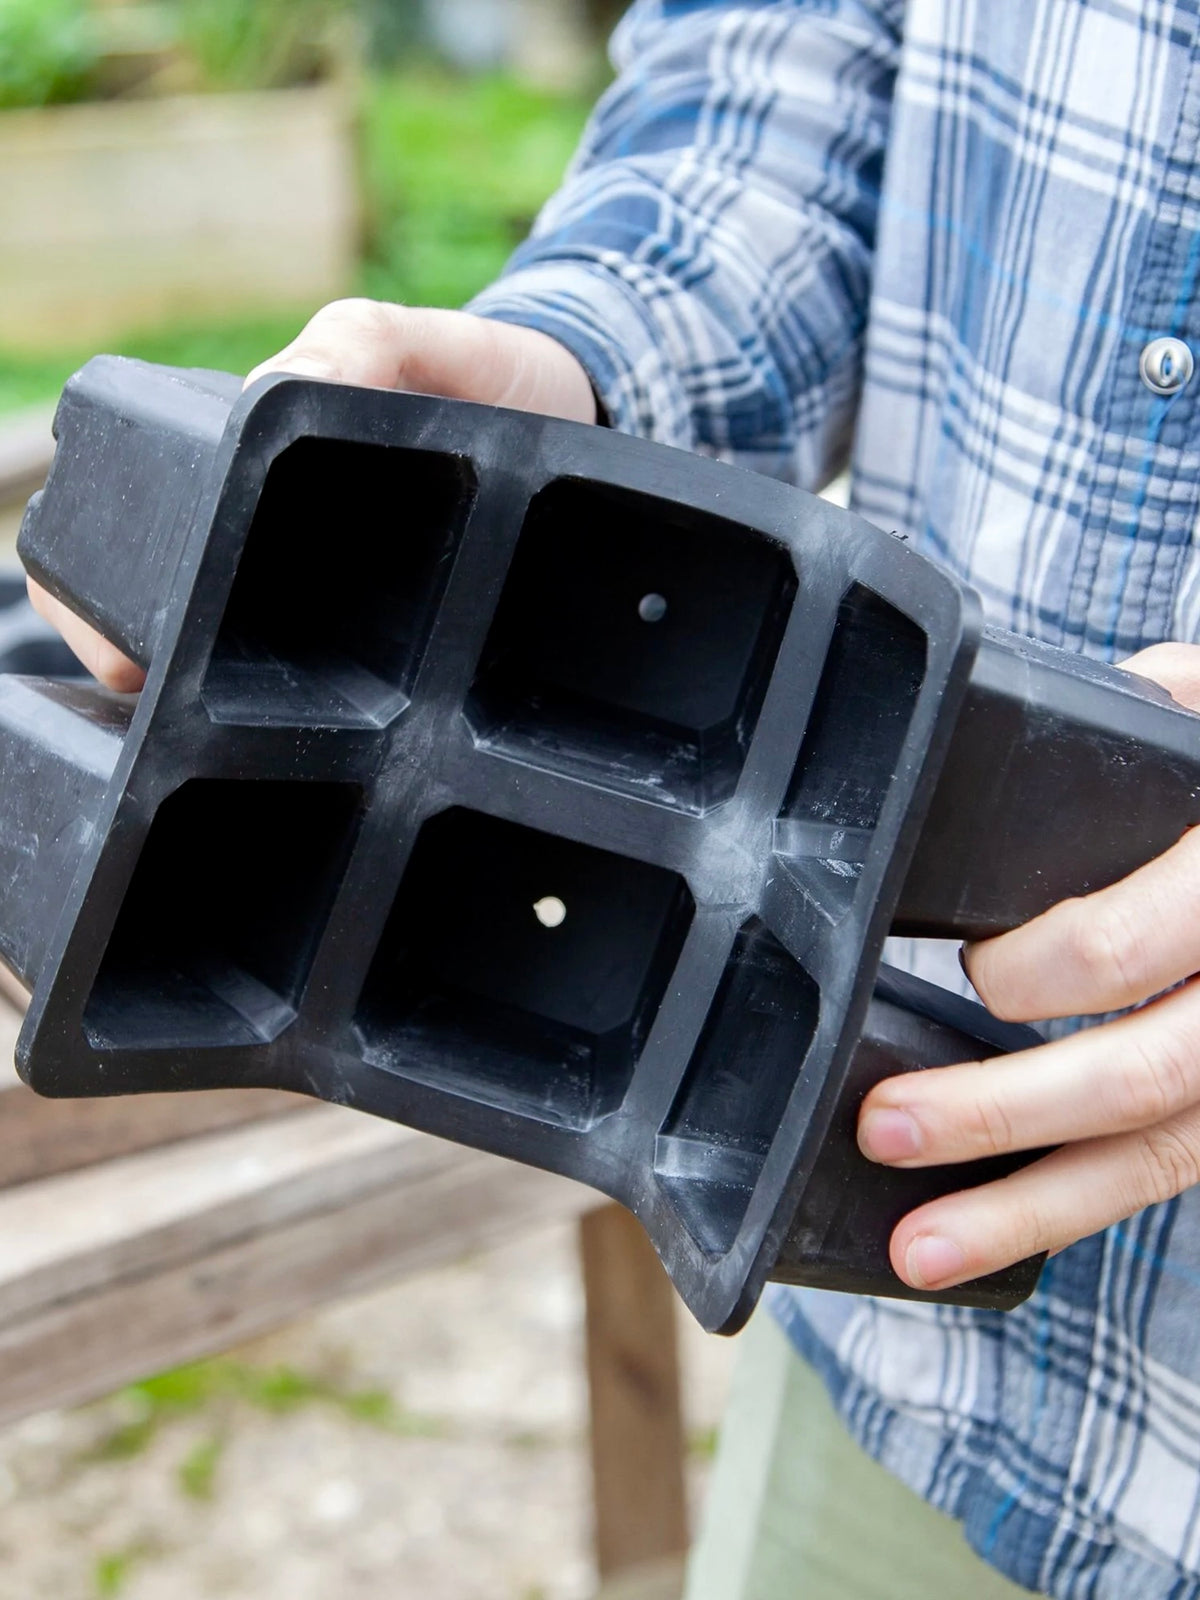 Natural Rubber Seed Tray, 6 Large Cells